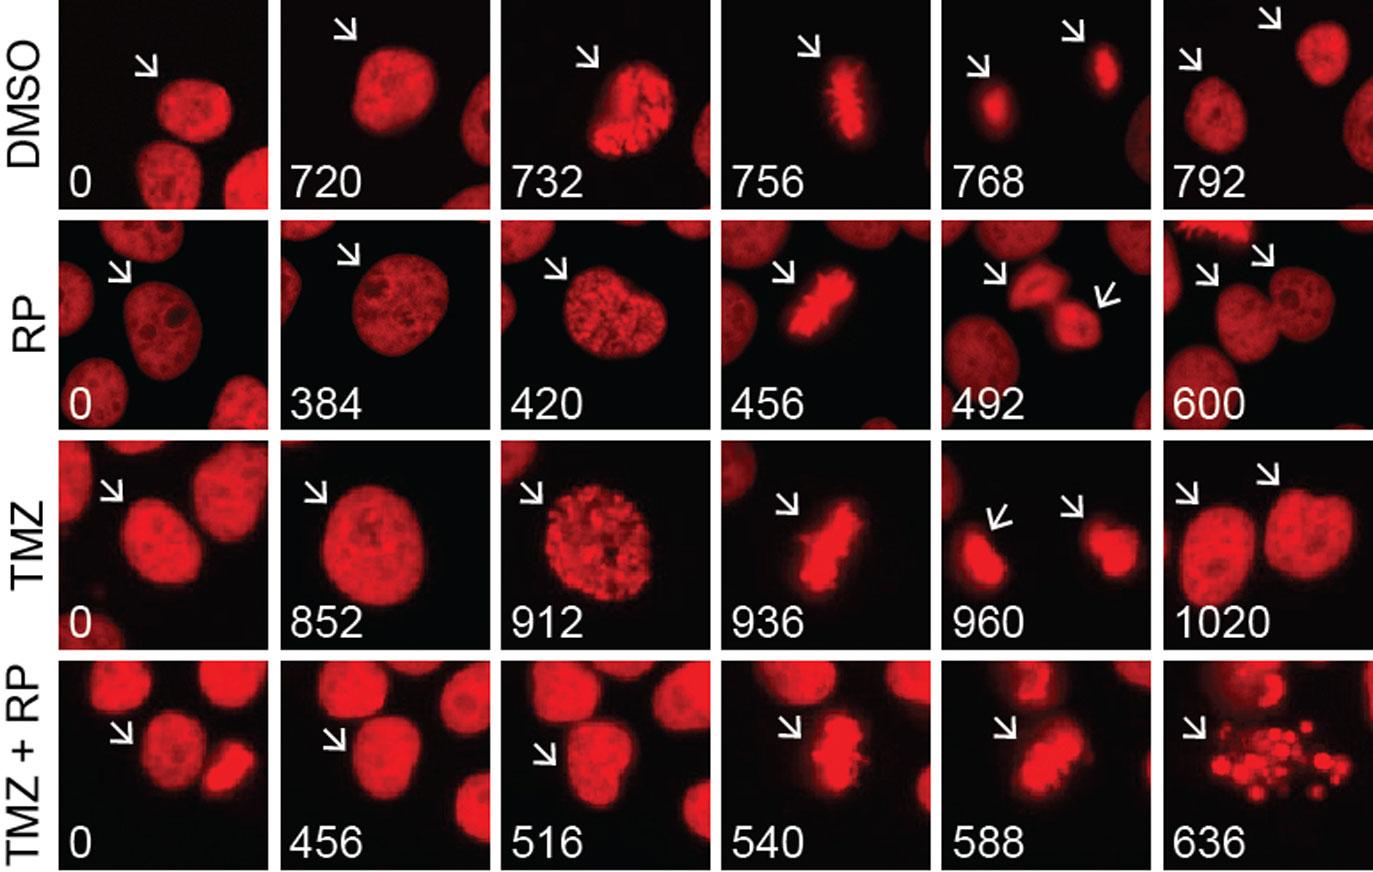 Microscopy images showing cells treated with RP-6306 alone, TMZ alone, and a combination of TMZ and RP-6306.